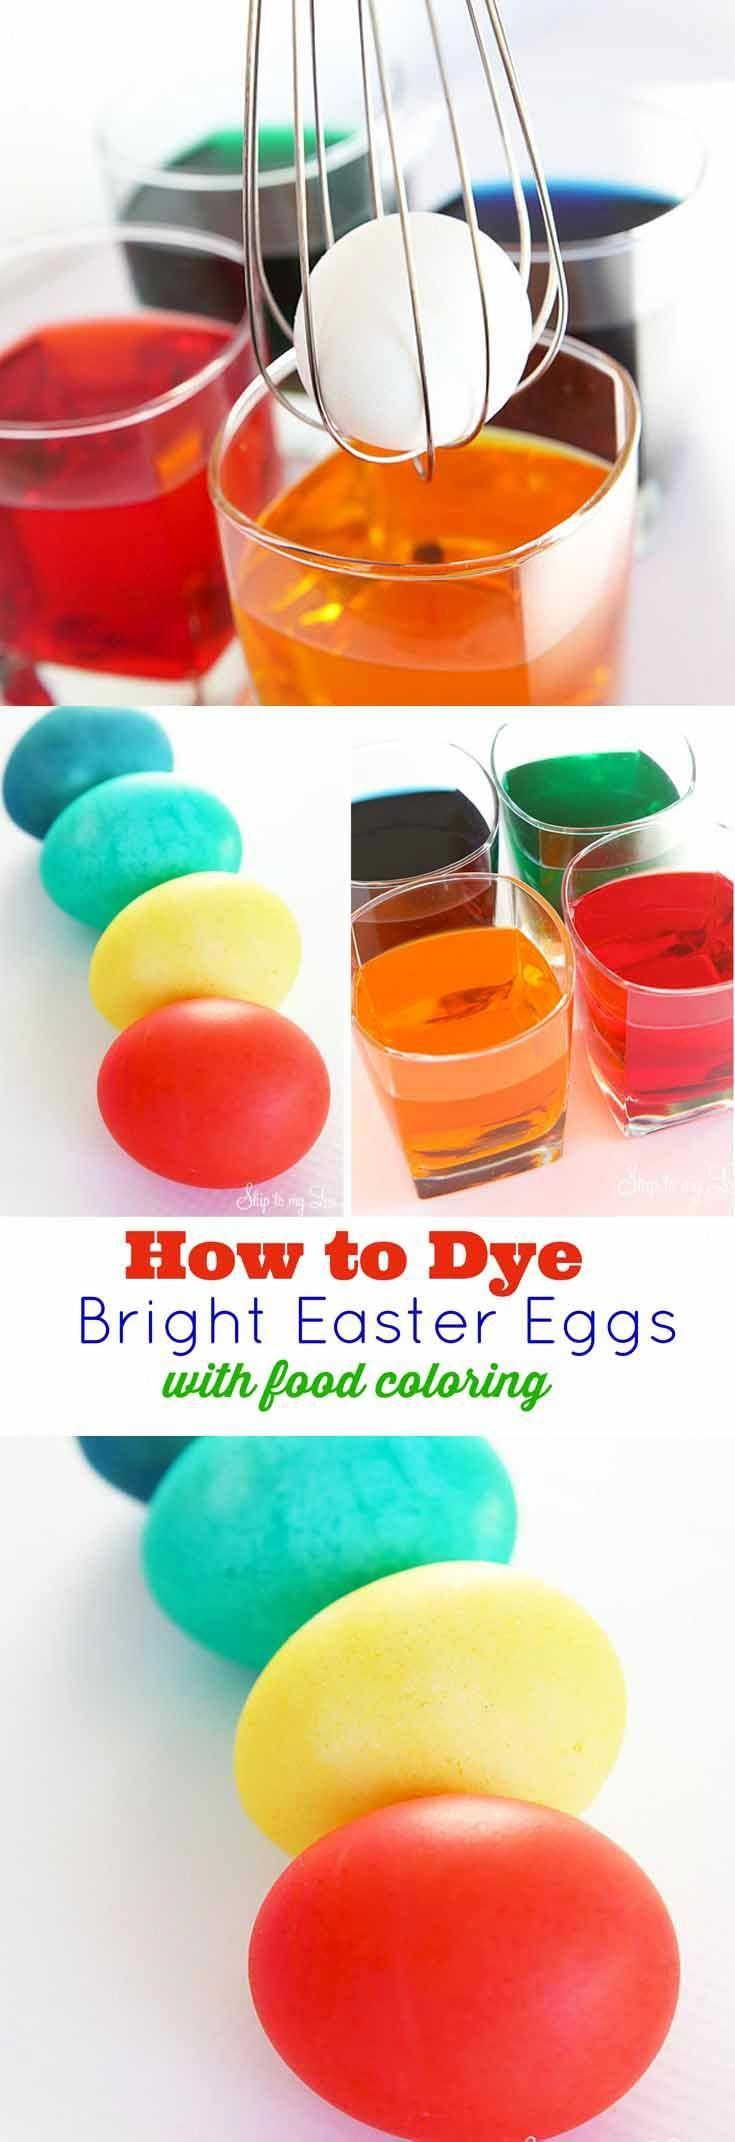 How To Make Easter Egg Dye With Food Coloring
 How to dye Easter eggs with food coloring Make brightly